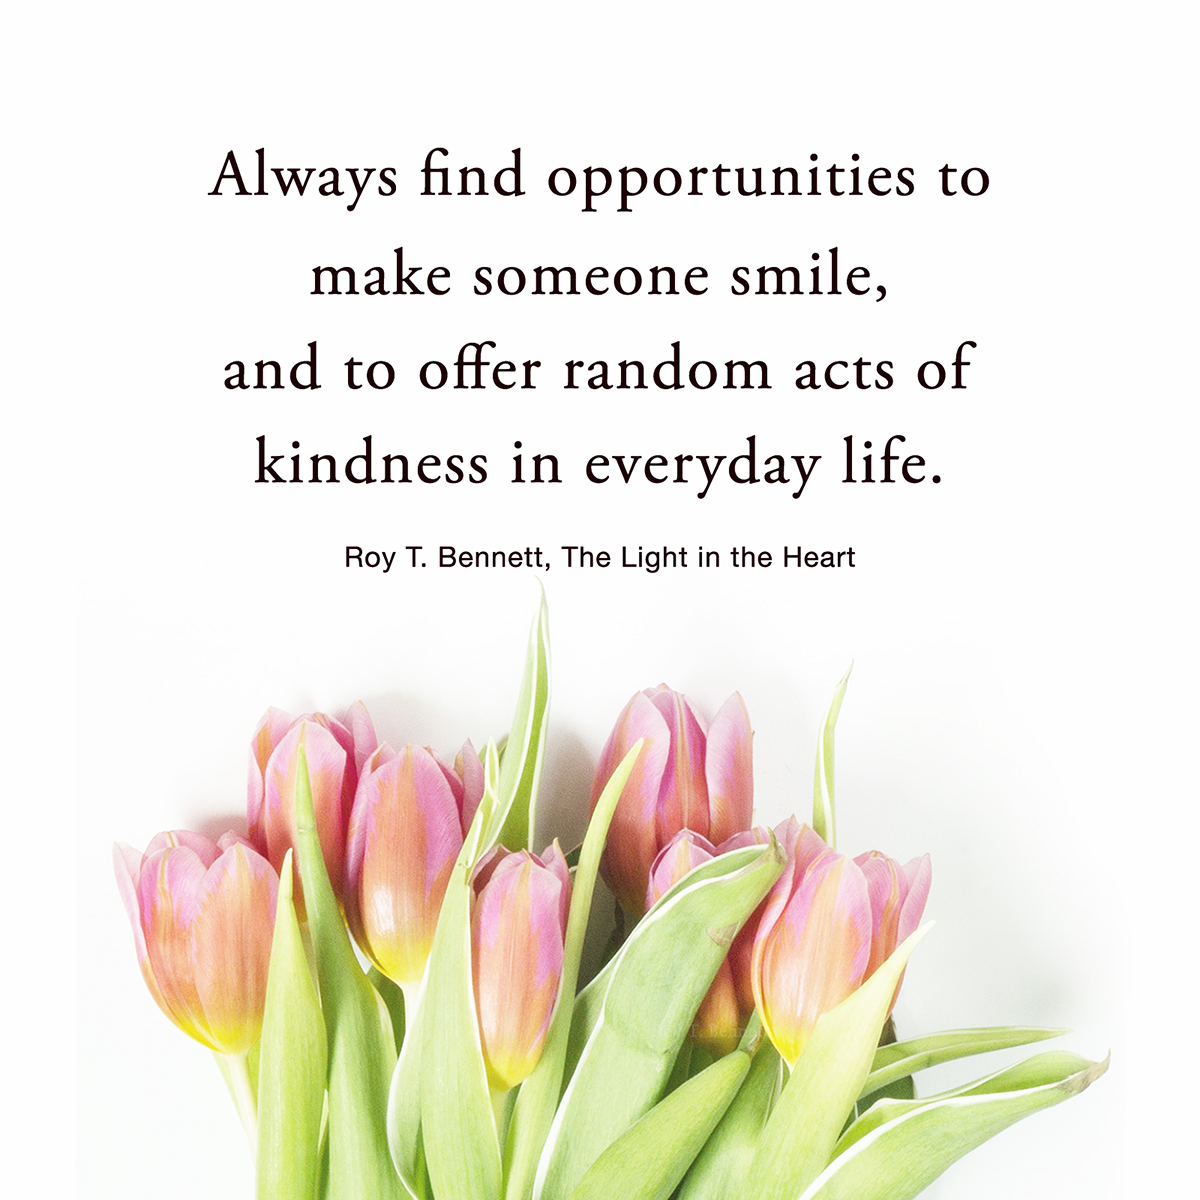 Always find opportunities to make someone smile, and to offer random acts of kindness in everyday life. Roy T. Bennett, The Light in the Heart #motivation #Inspiration #quote #quotes #RoyTBennett